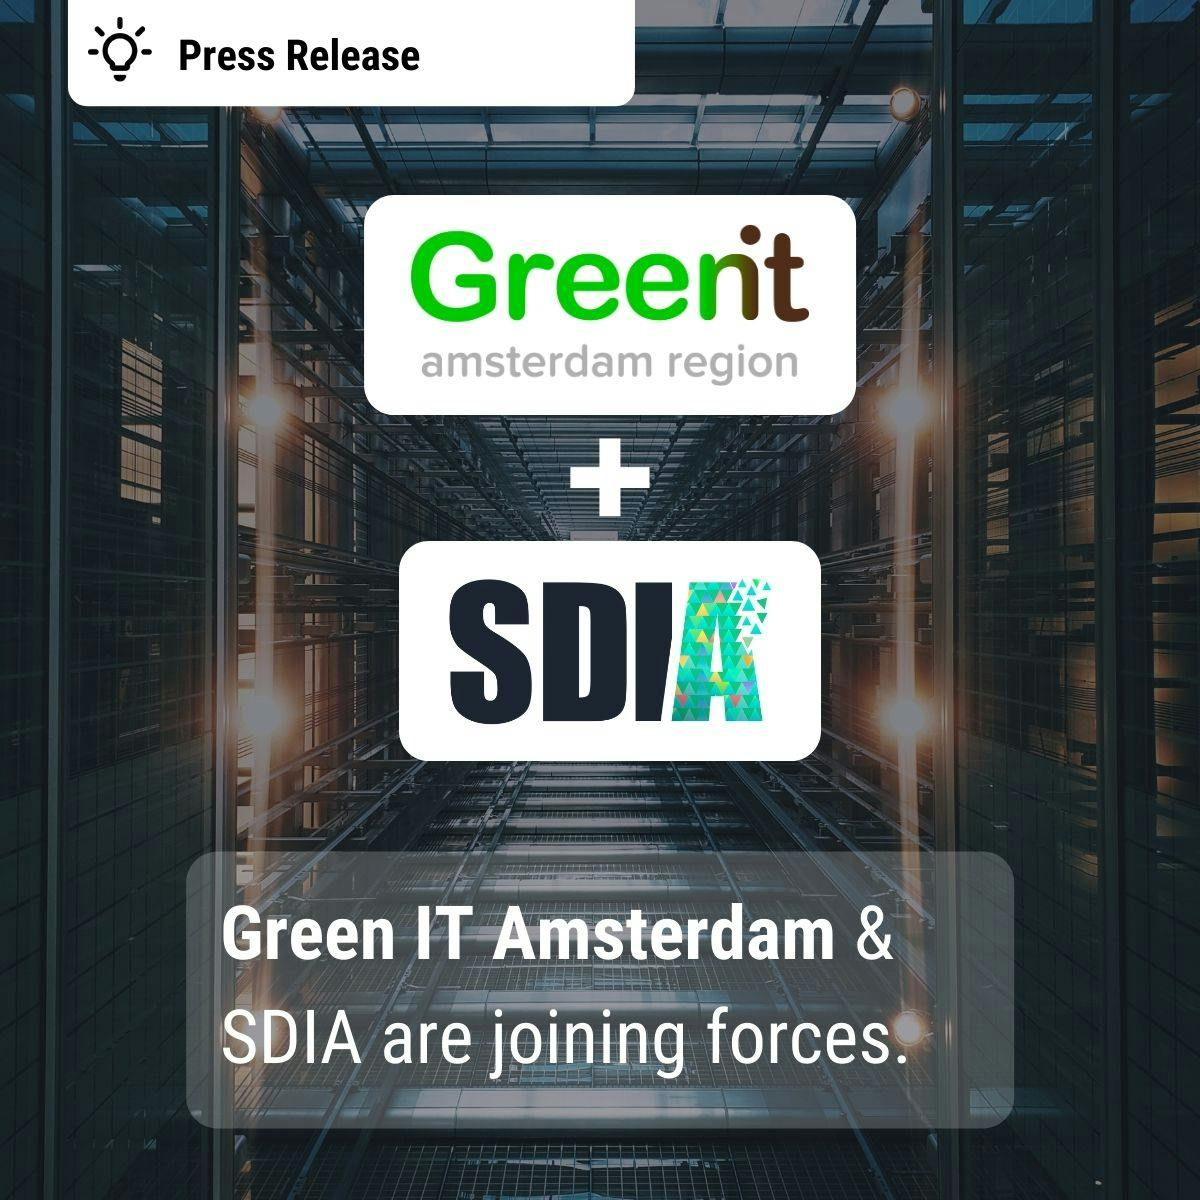 The SDIA and Green IT Amsterdam join forces